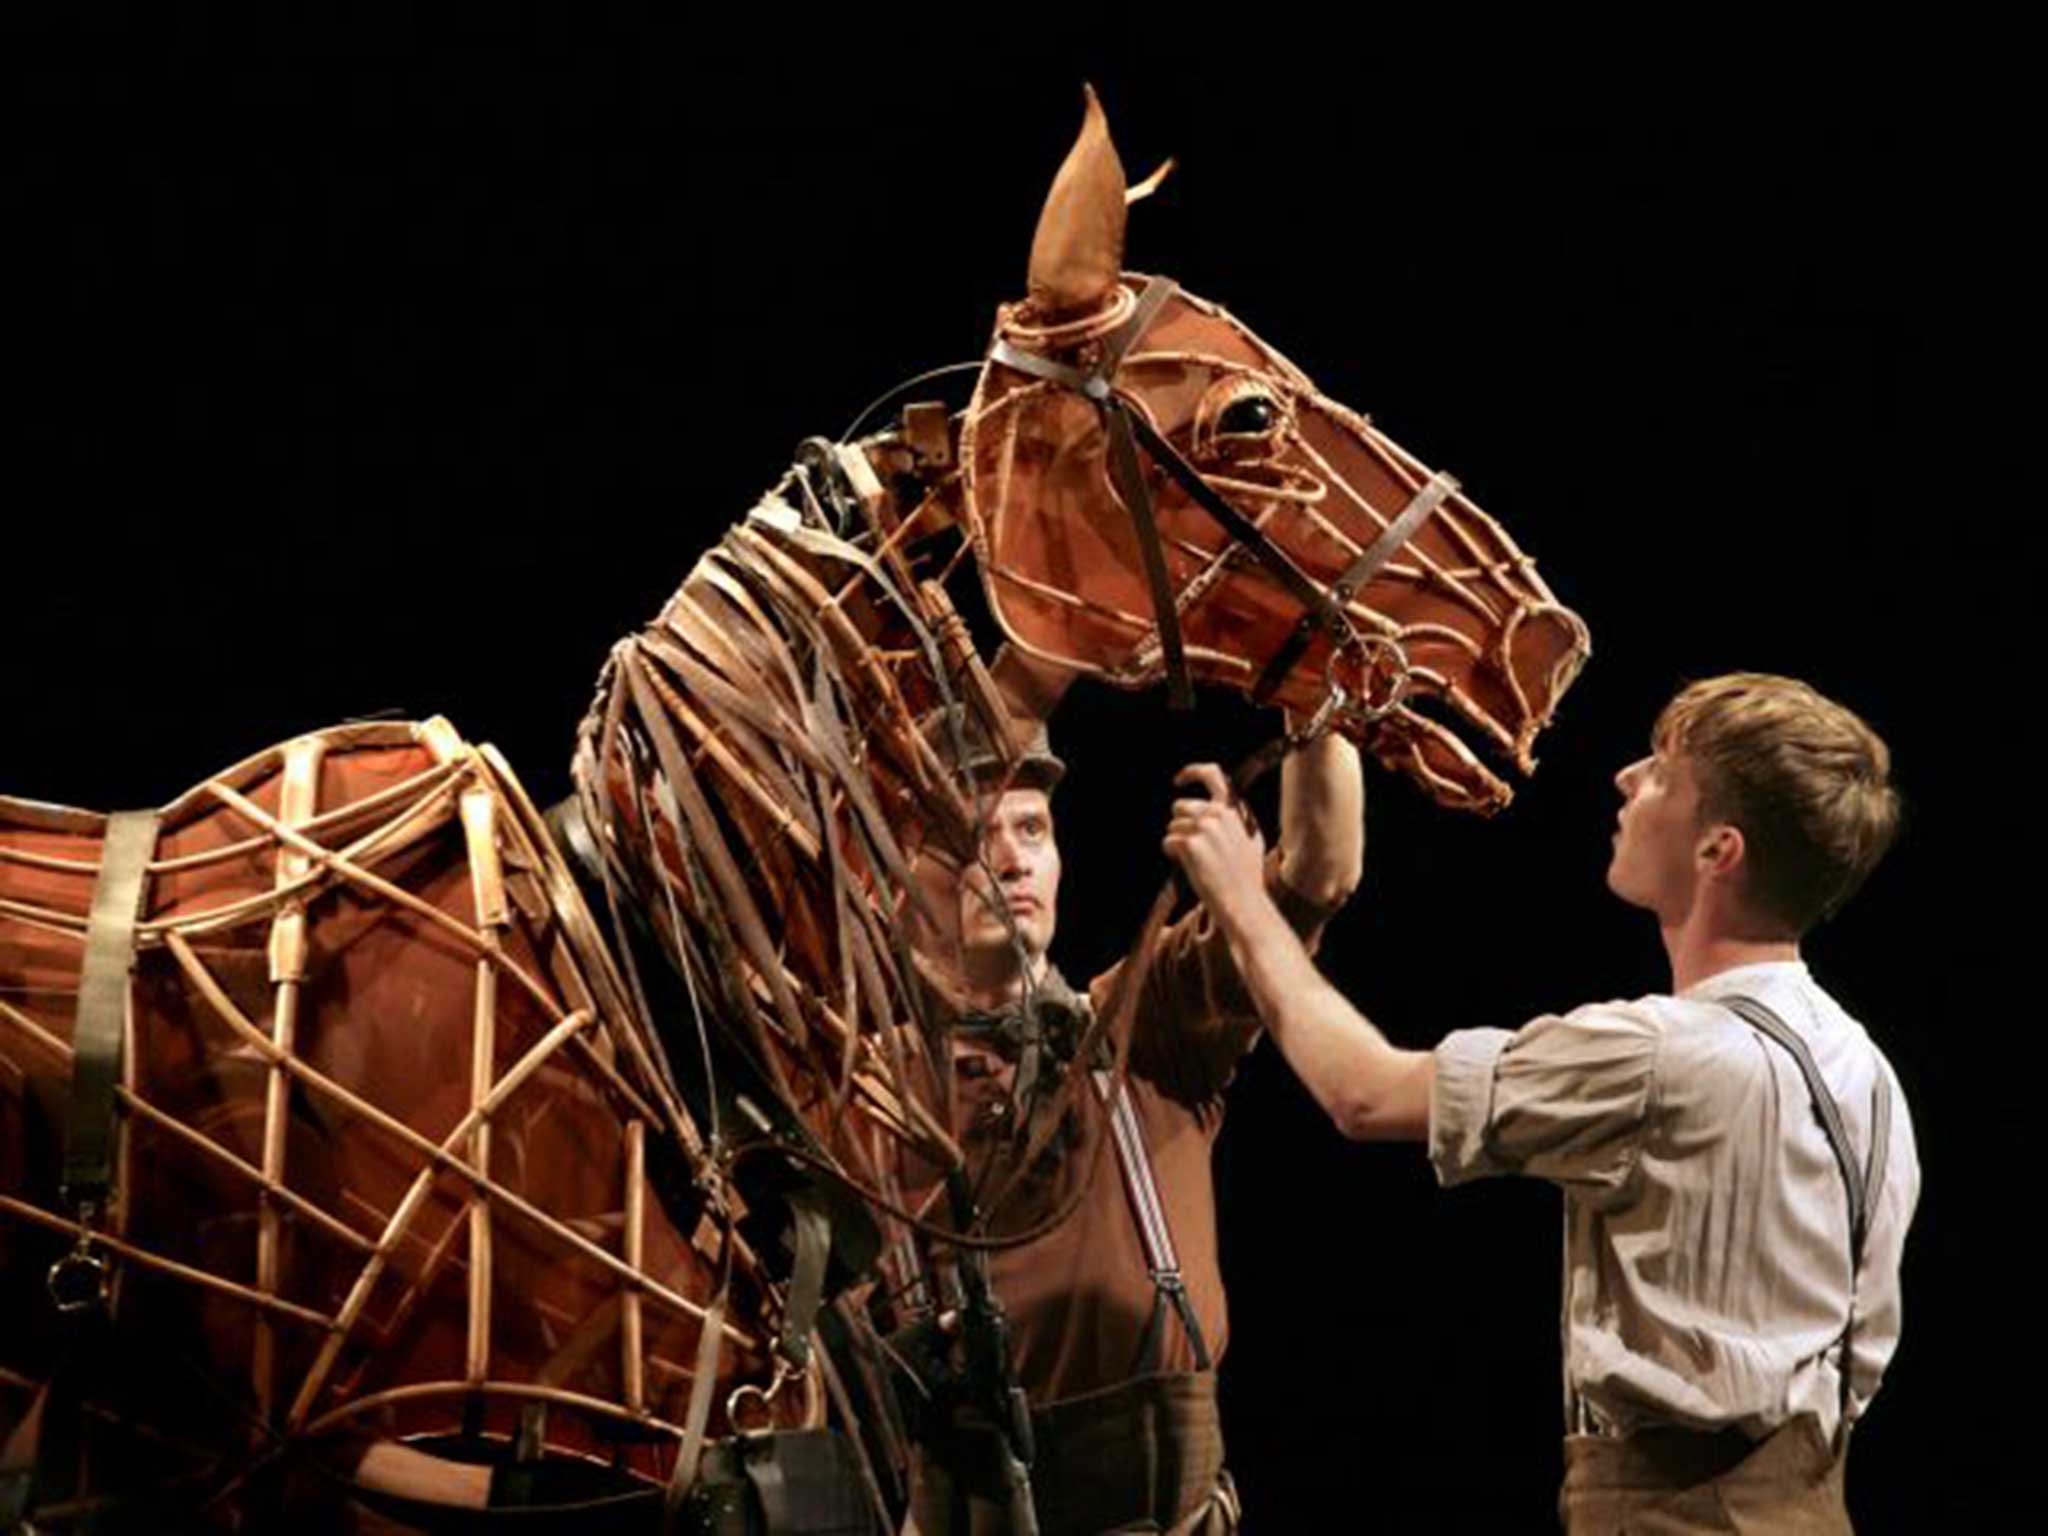 The populr National Theatre production of Michael Morpurgo's War Horse